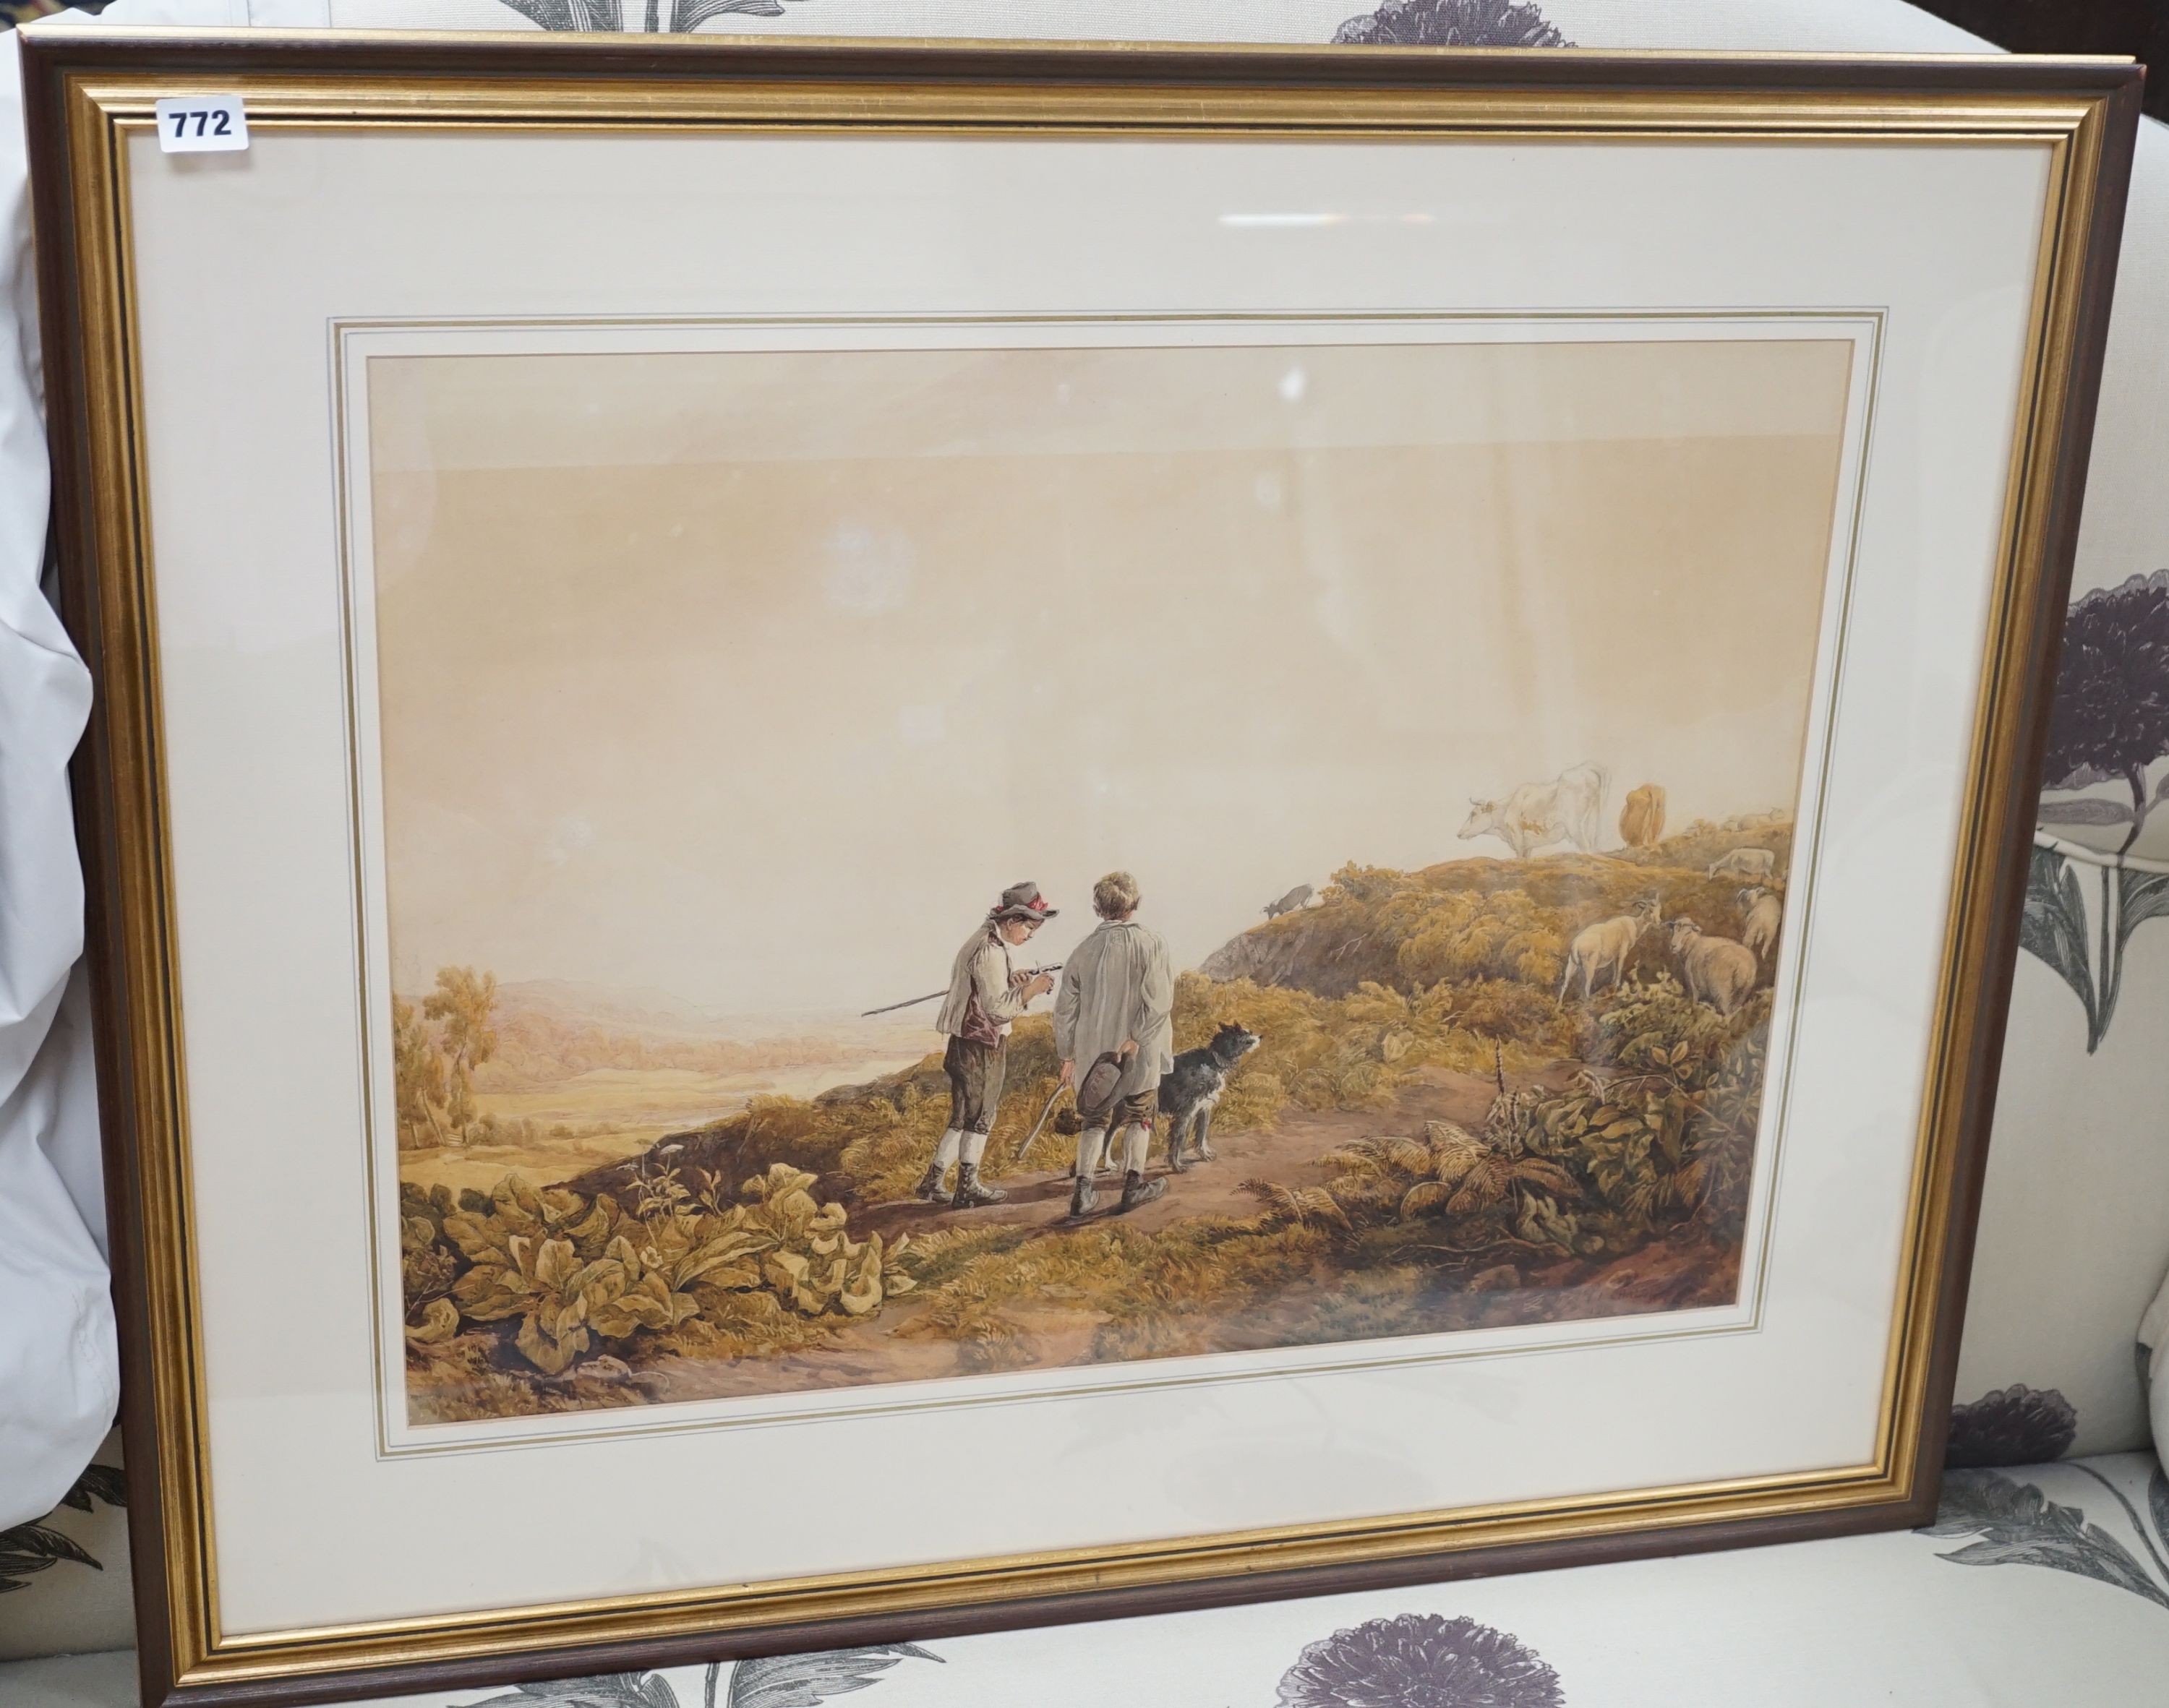 John James Chalon (1778-1854), Shepherd boy and cowherd in a landscape, watercolour, signed and dated 1812, 47 x 63cm